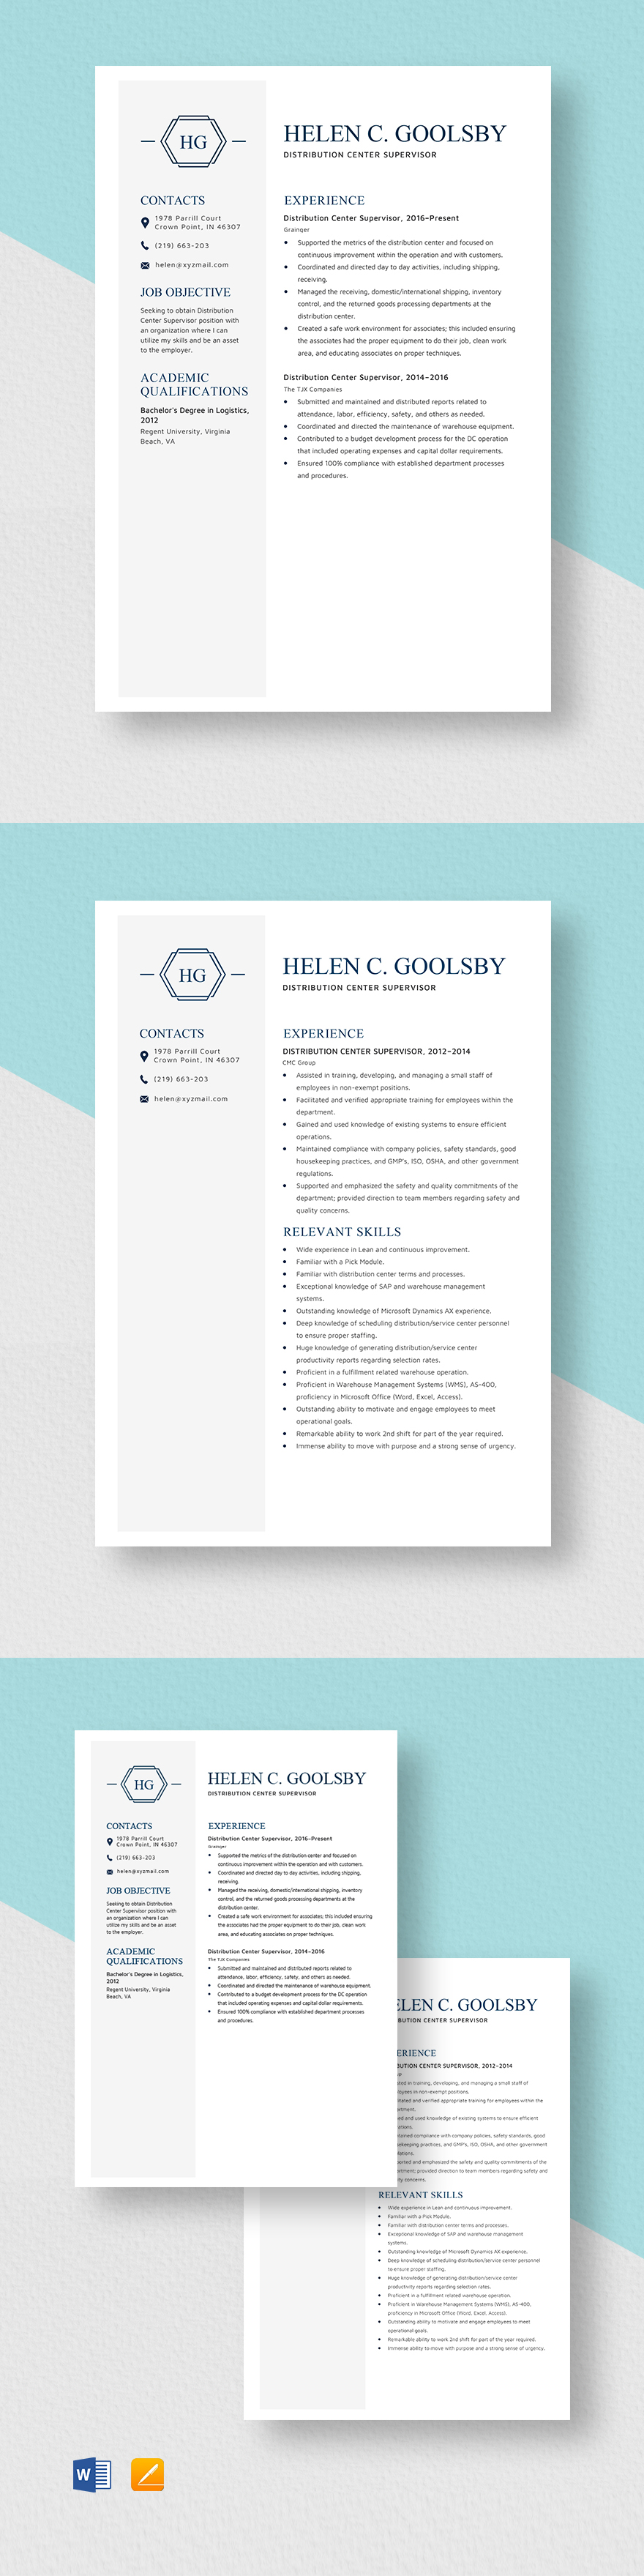 Free Distribution Director Resume Template - Word, Apple Pages ...